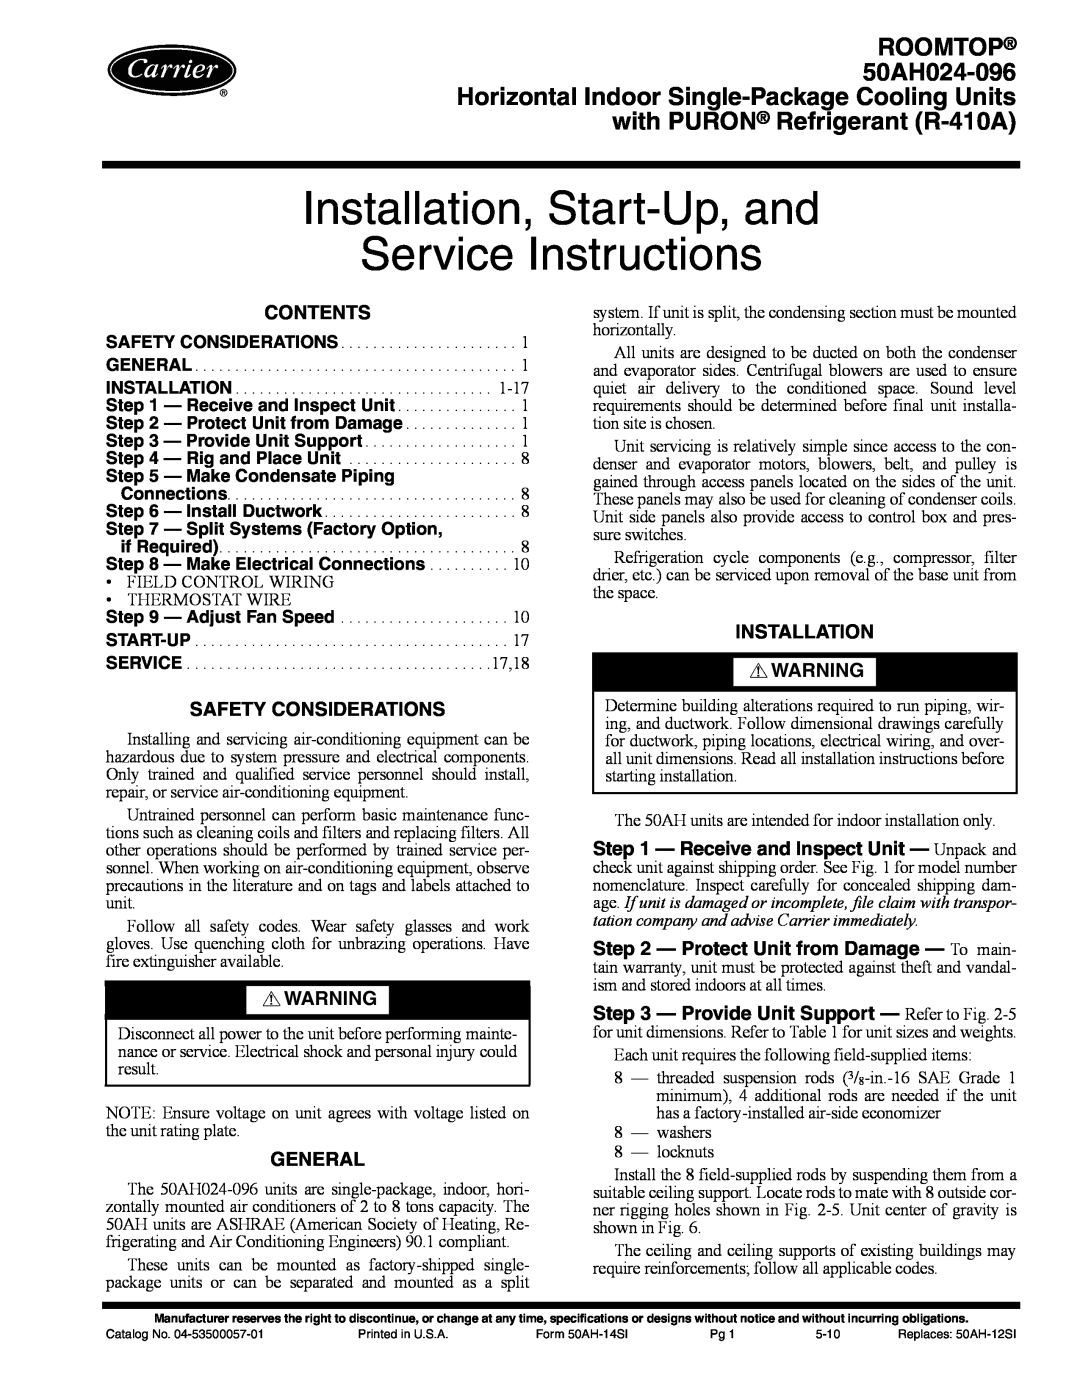 Carrier 50AH024-096 specifications Installation, Start-Up,and Service Instructions, with PURON Refrigerant R-410A 